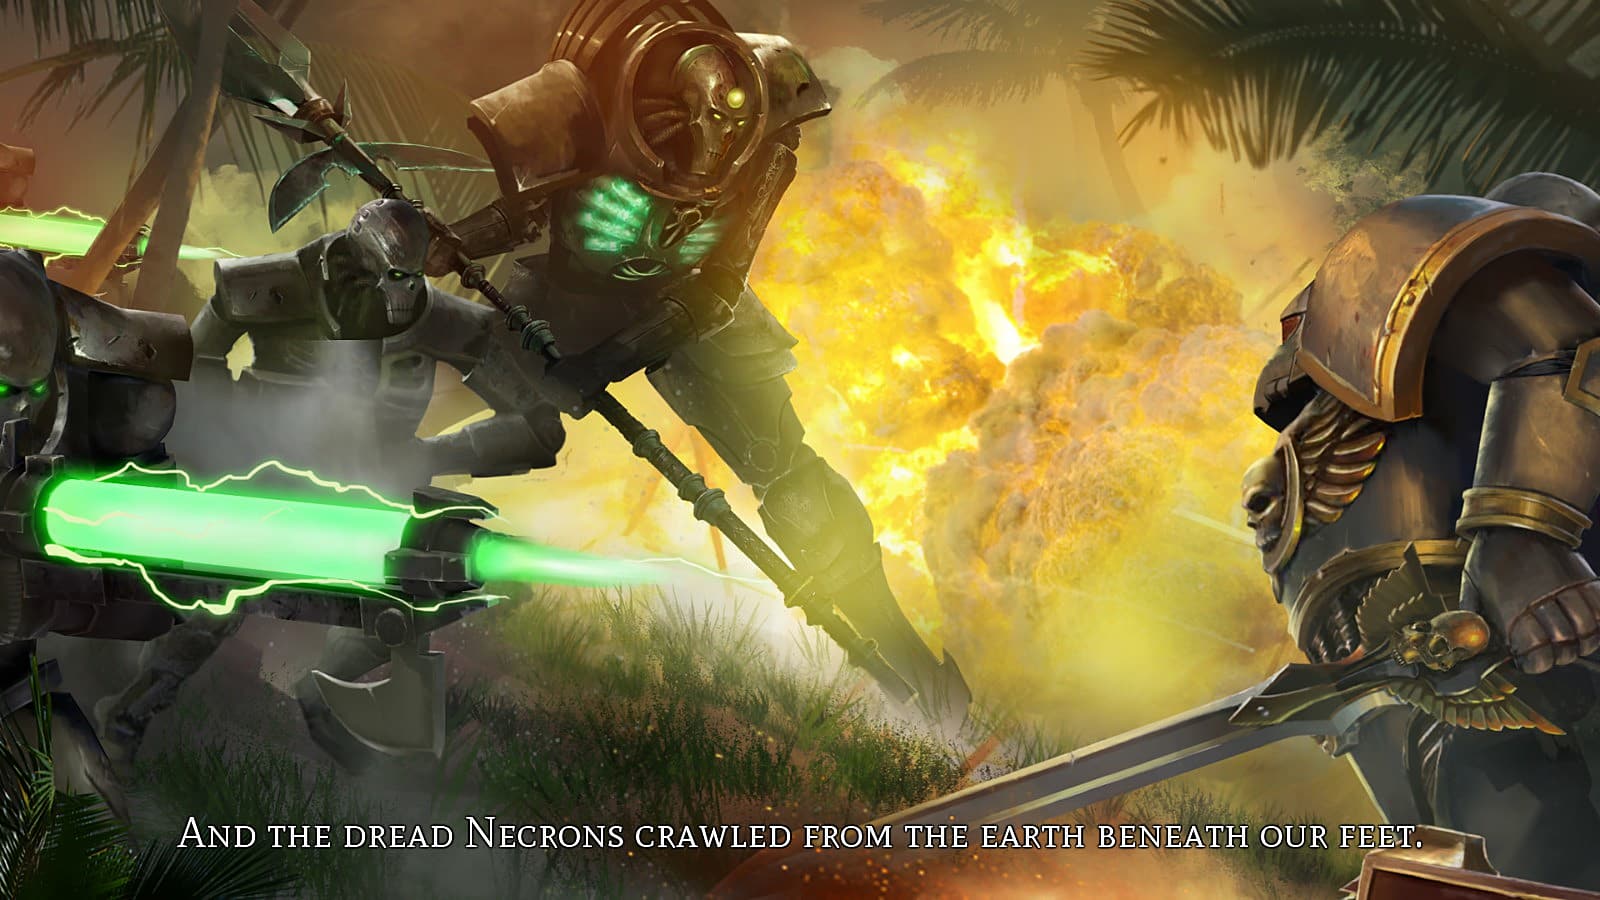 Preview: Warhammer 40K Goes 4X With Gladius Of War